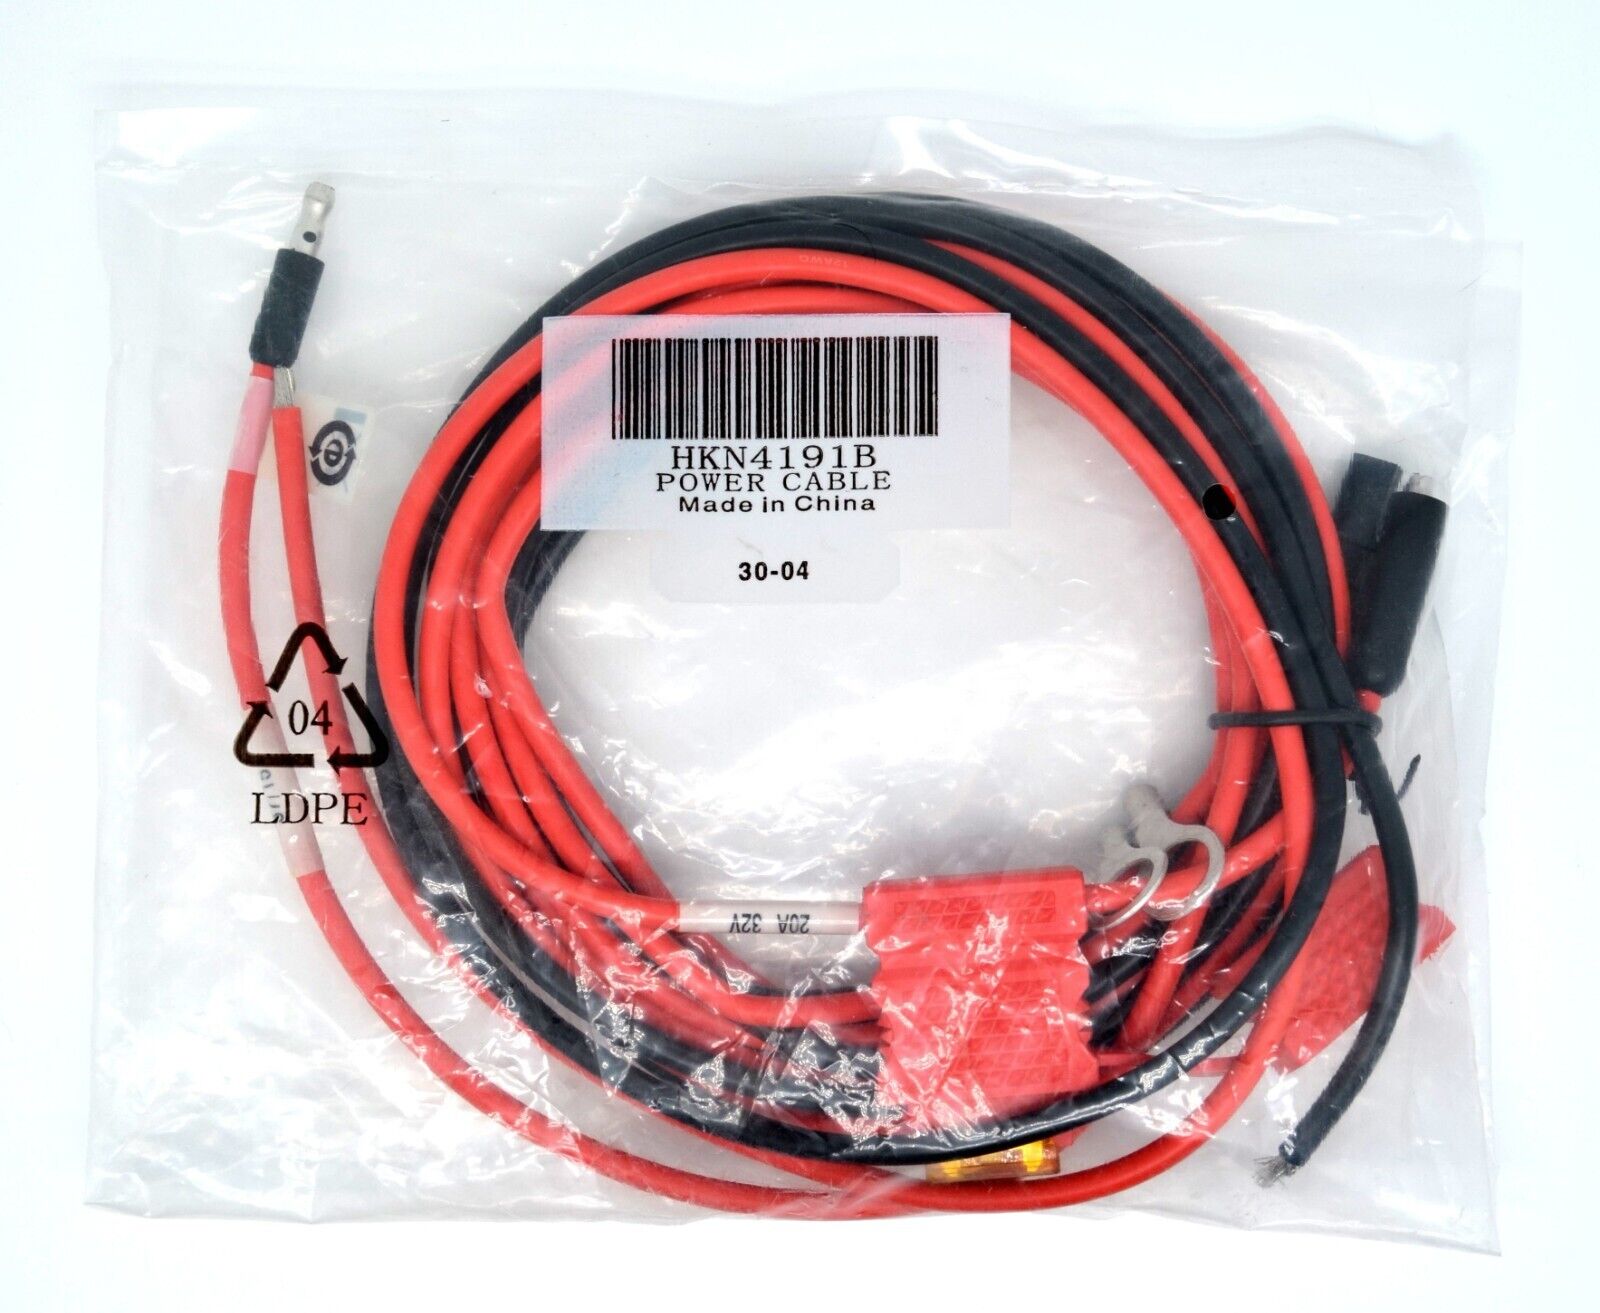 Hkn4191b New Oem Motorola Power Cable To Battery 10', 20a, 40-60w Radios